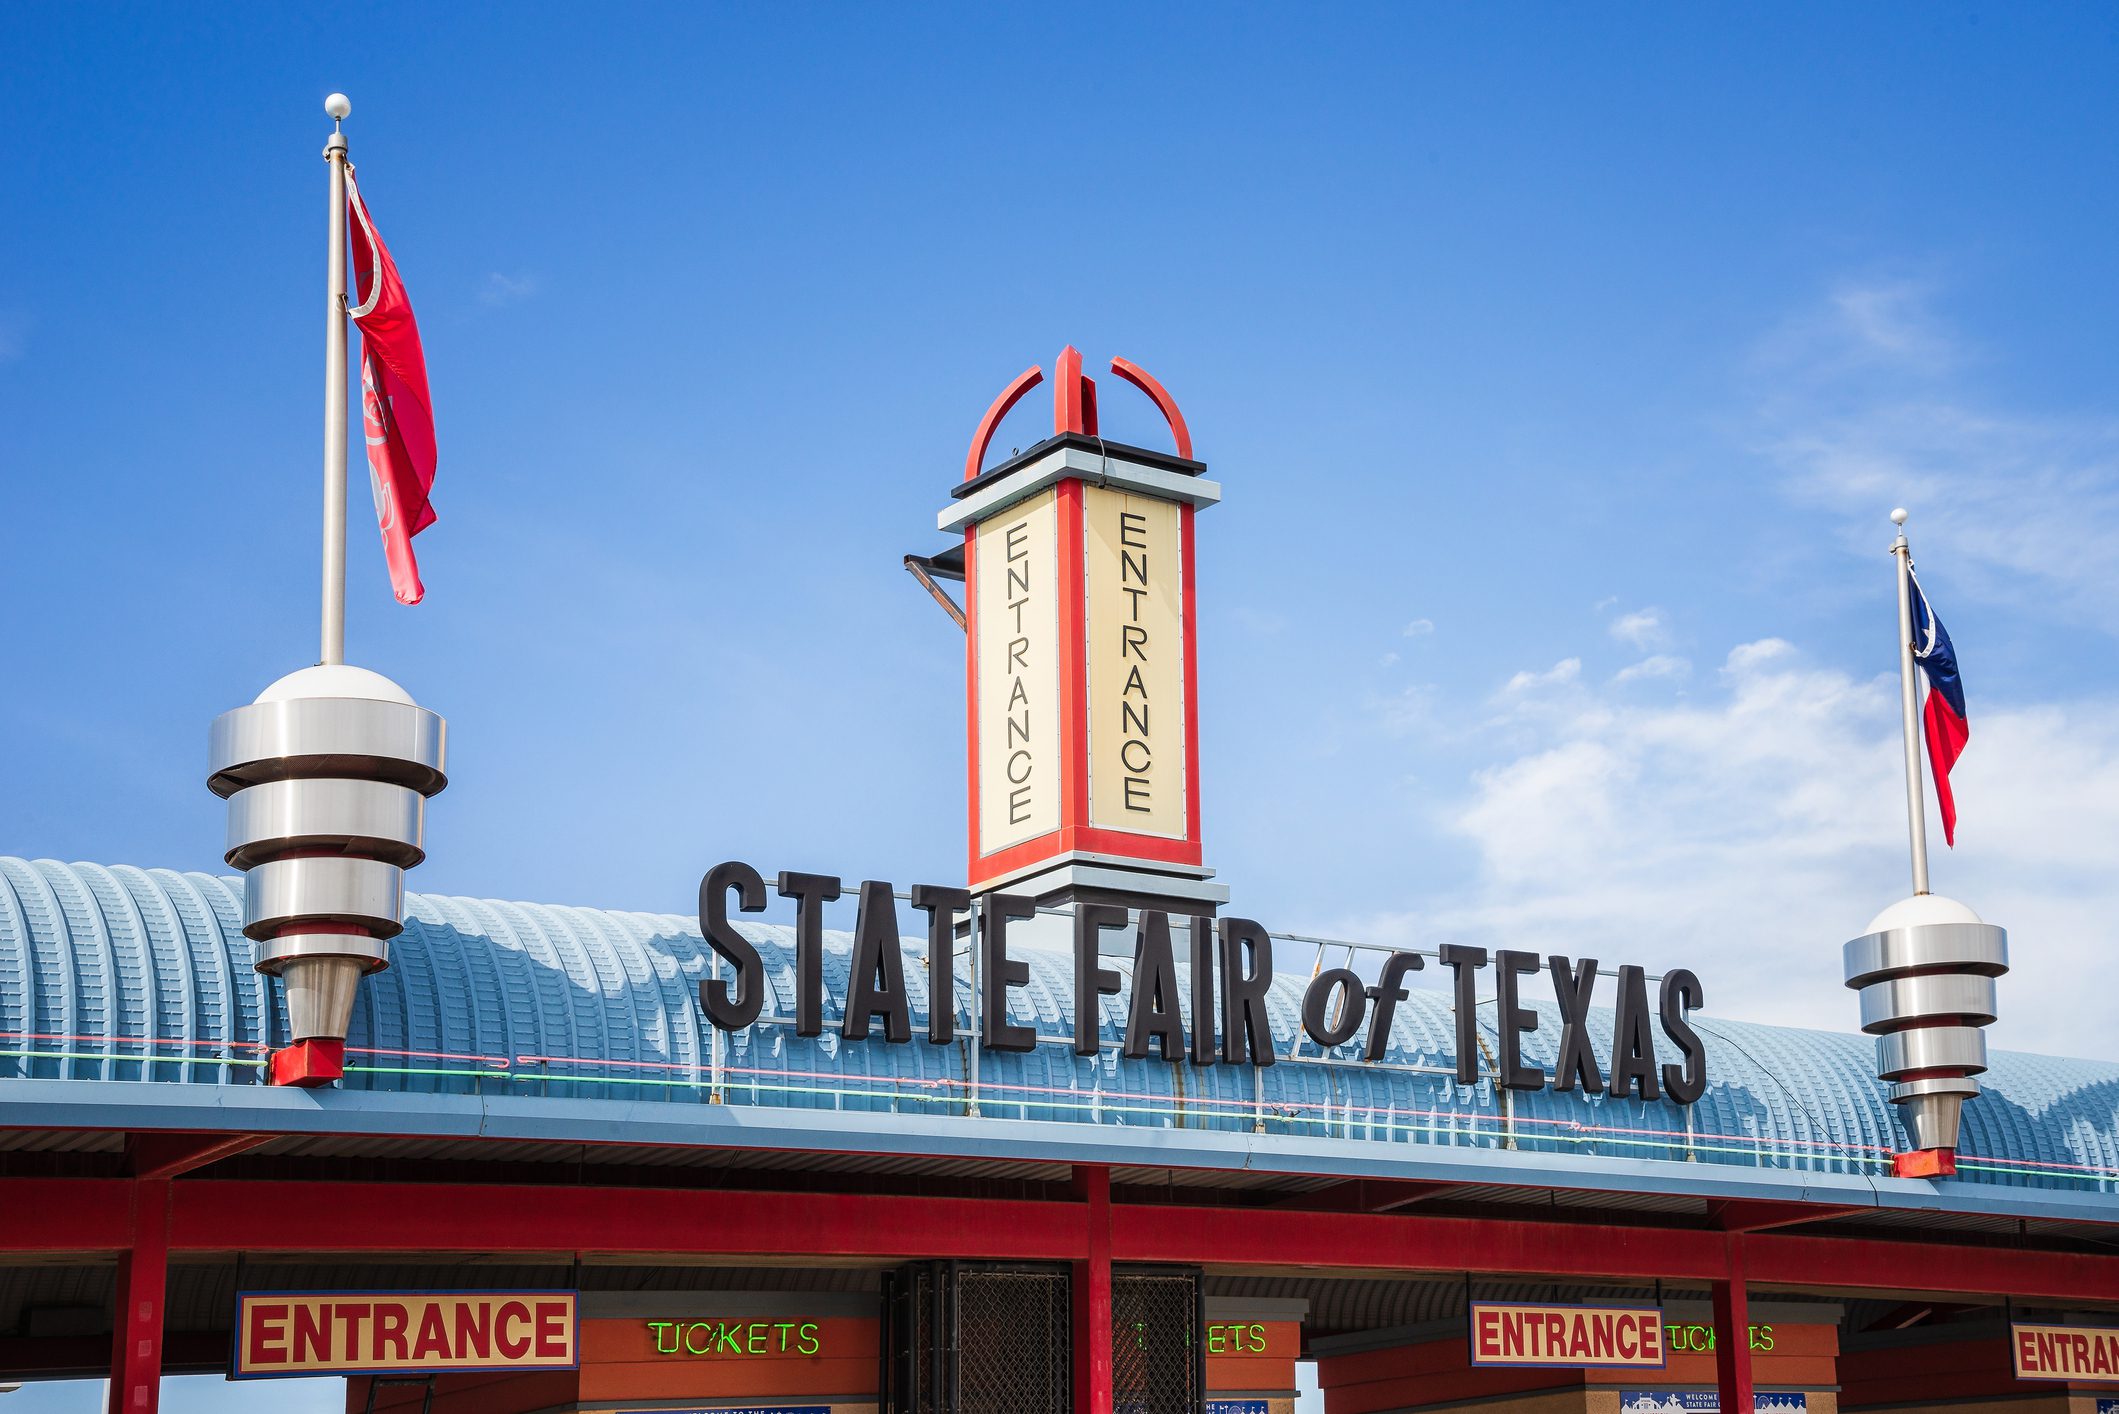 Entrance to the State Fair of Texas